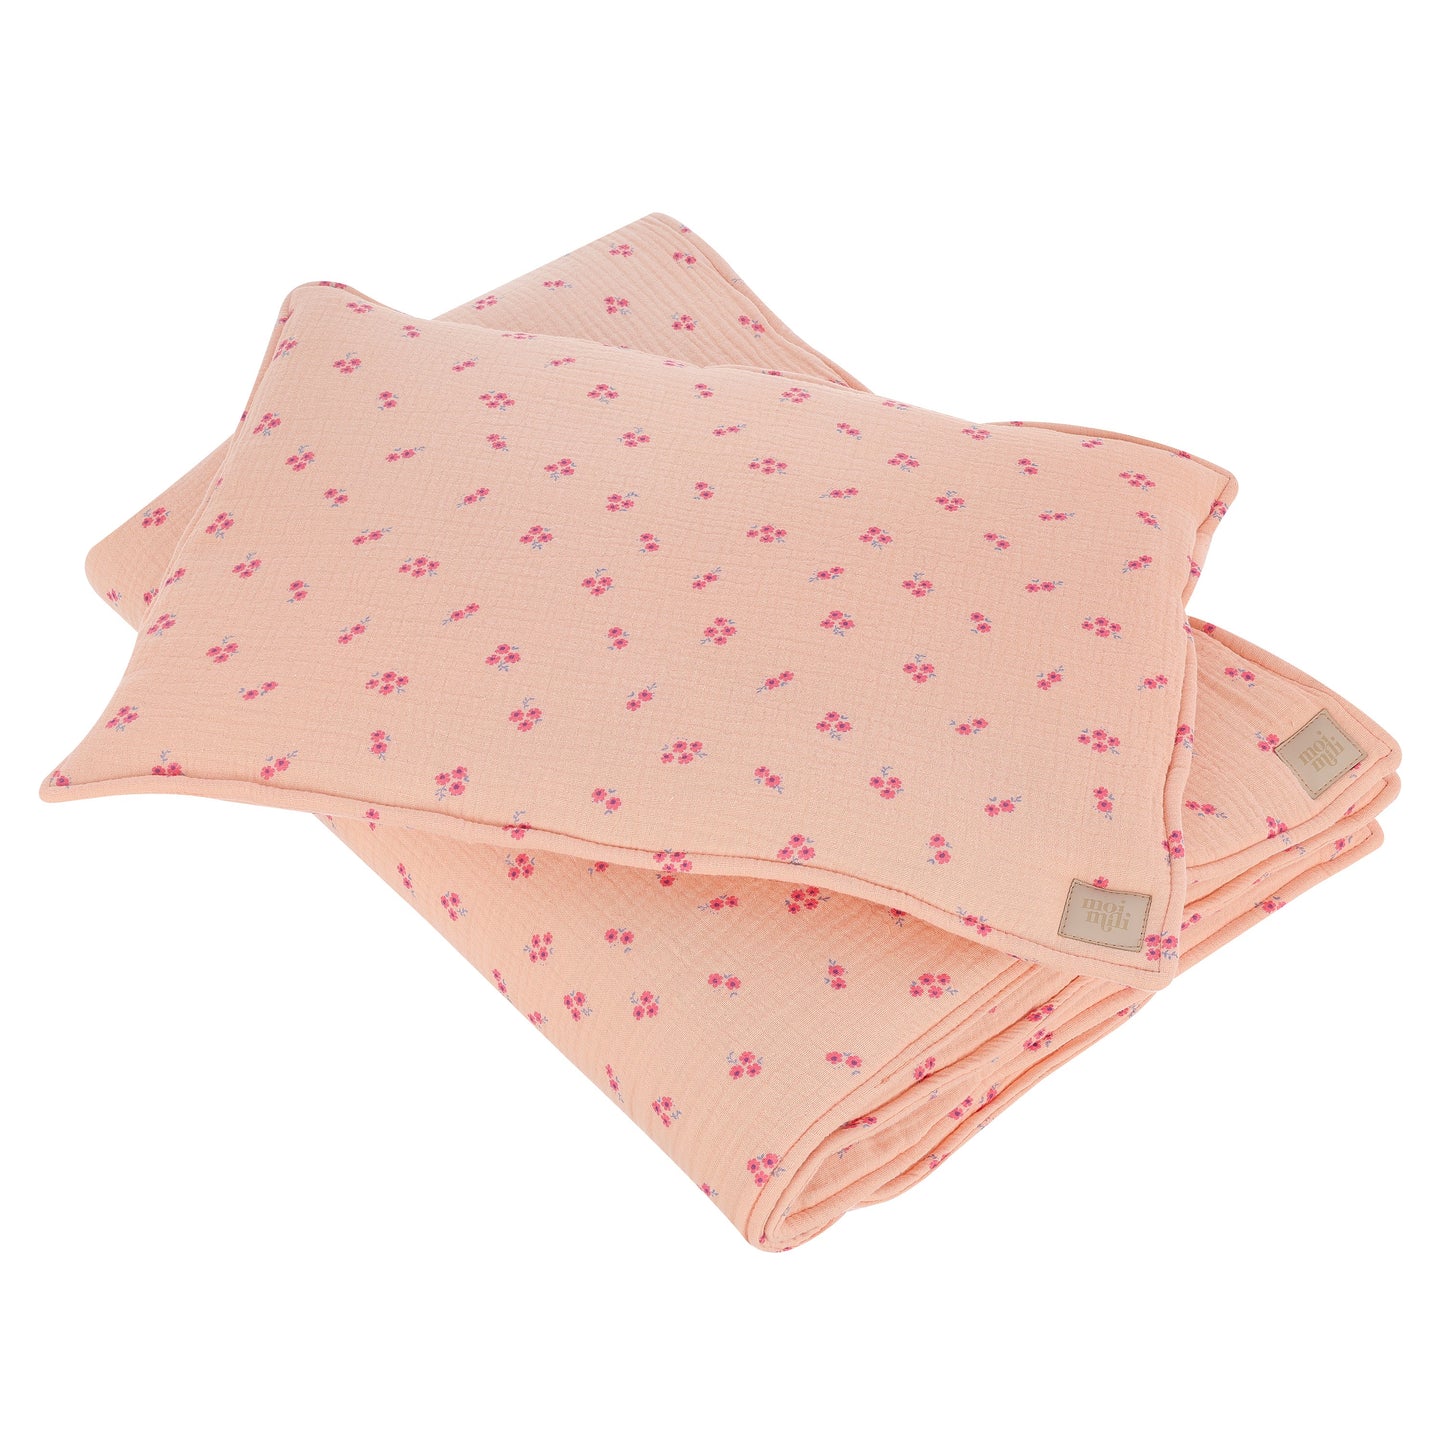 Muslin "Pink forget-me-not" Child Cover Set